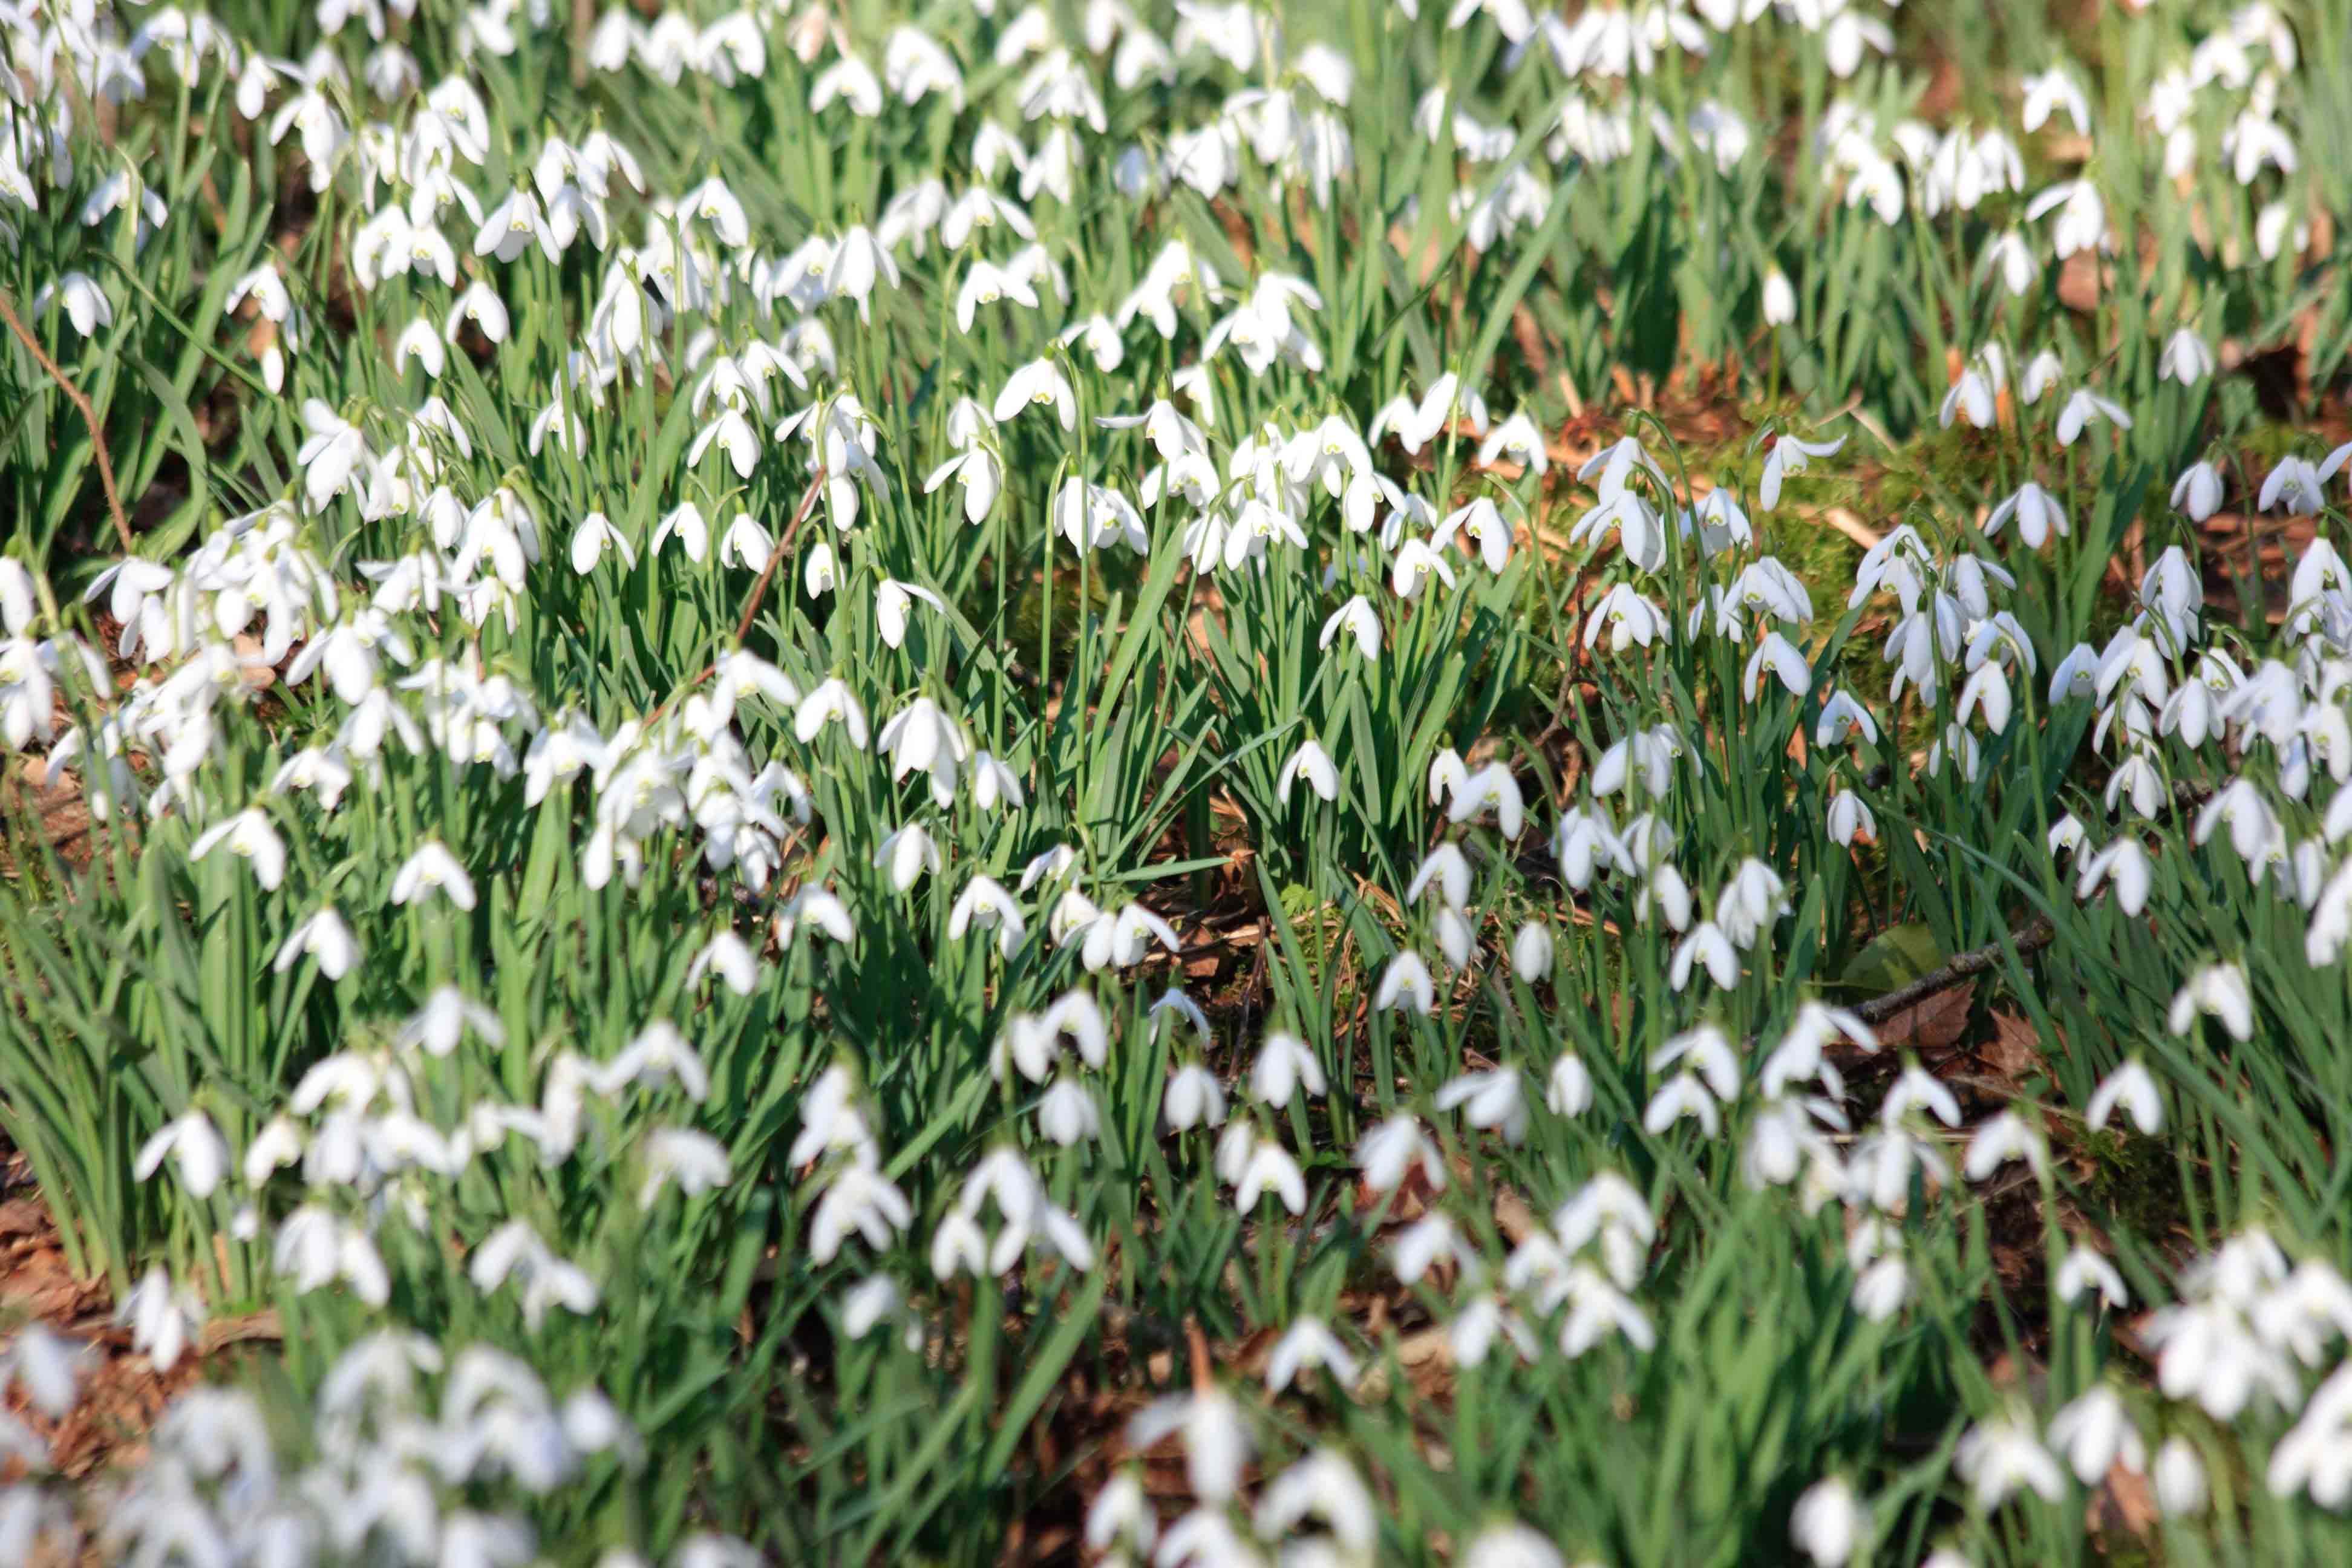 Snowdrops in the Wheddon Valley on Exmoor. February 2013.